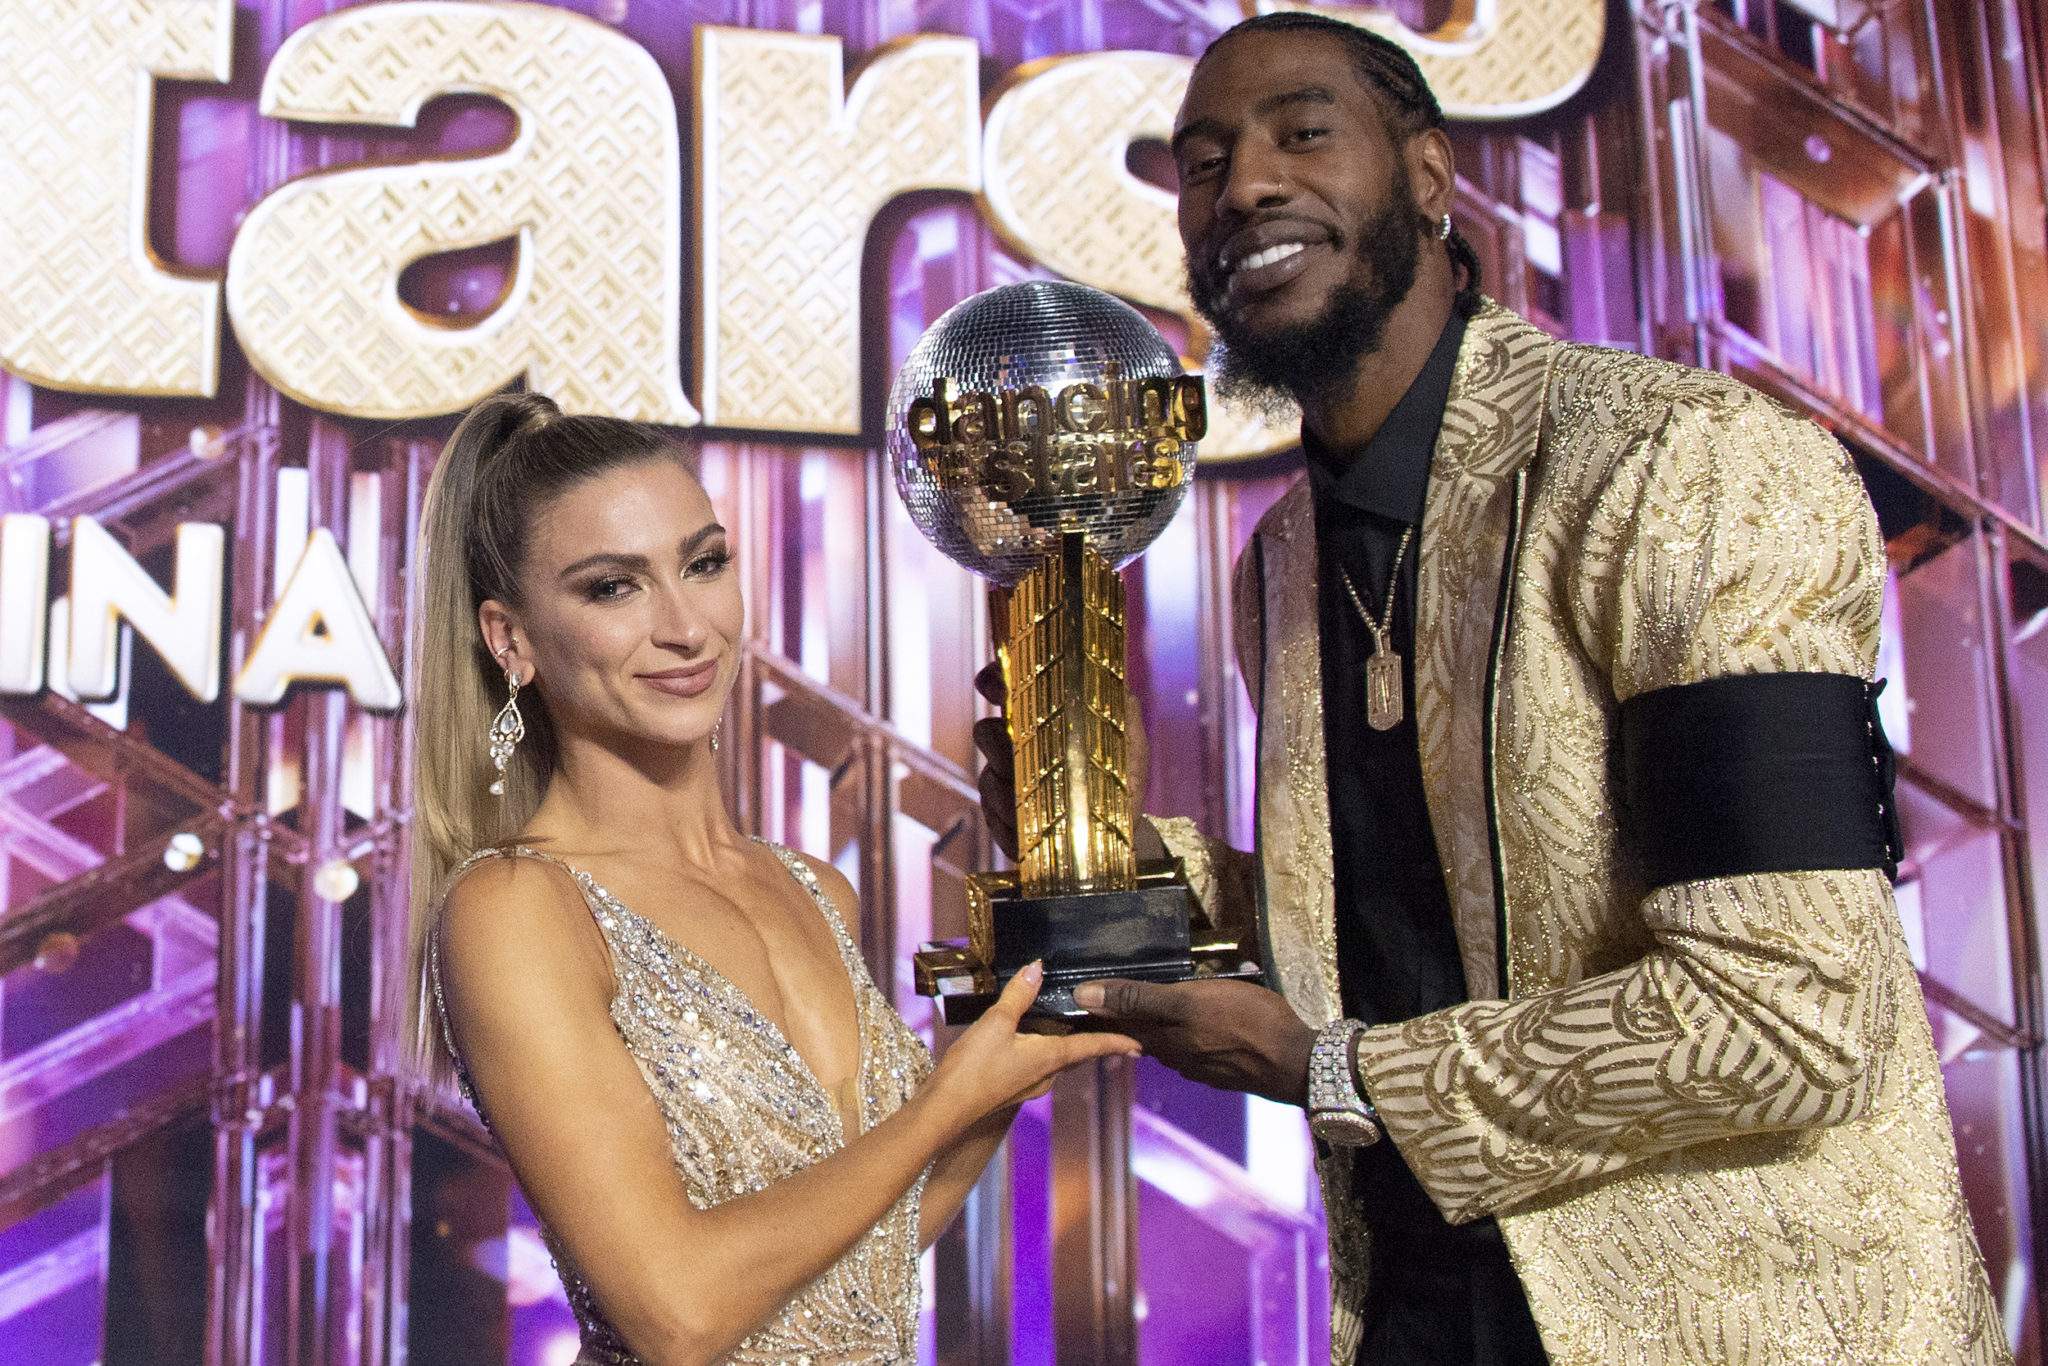 Iman Shumpert Becomes 1st NBA Player to Win Dancing with the Stars